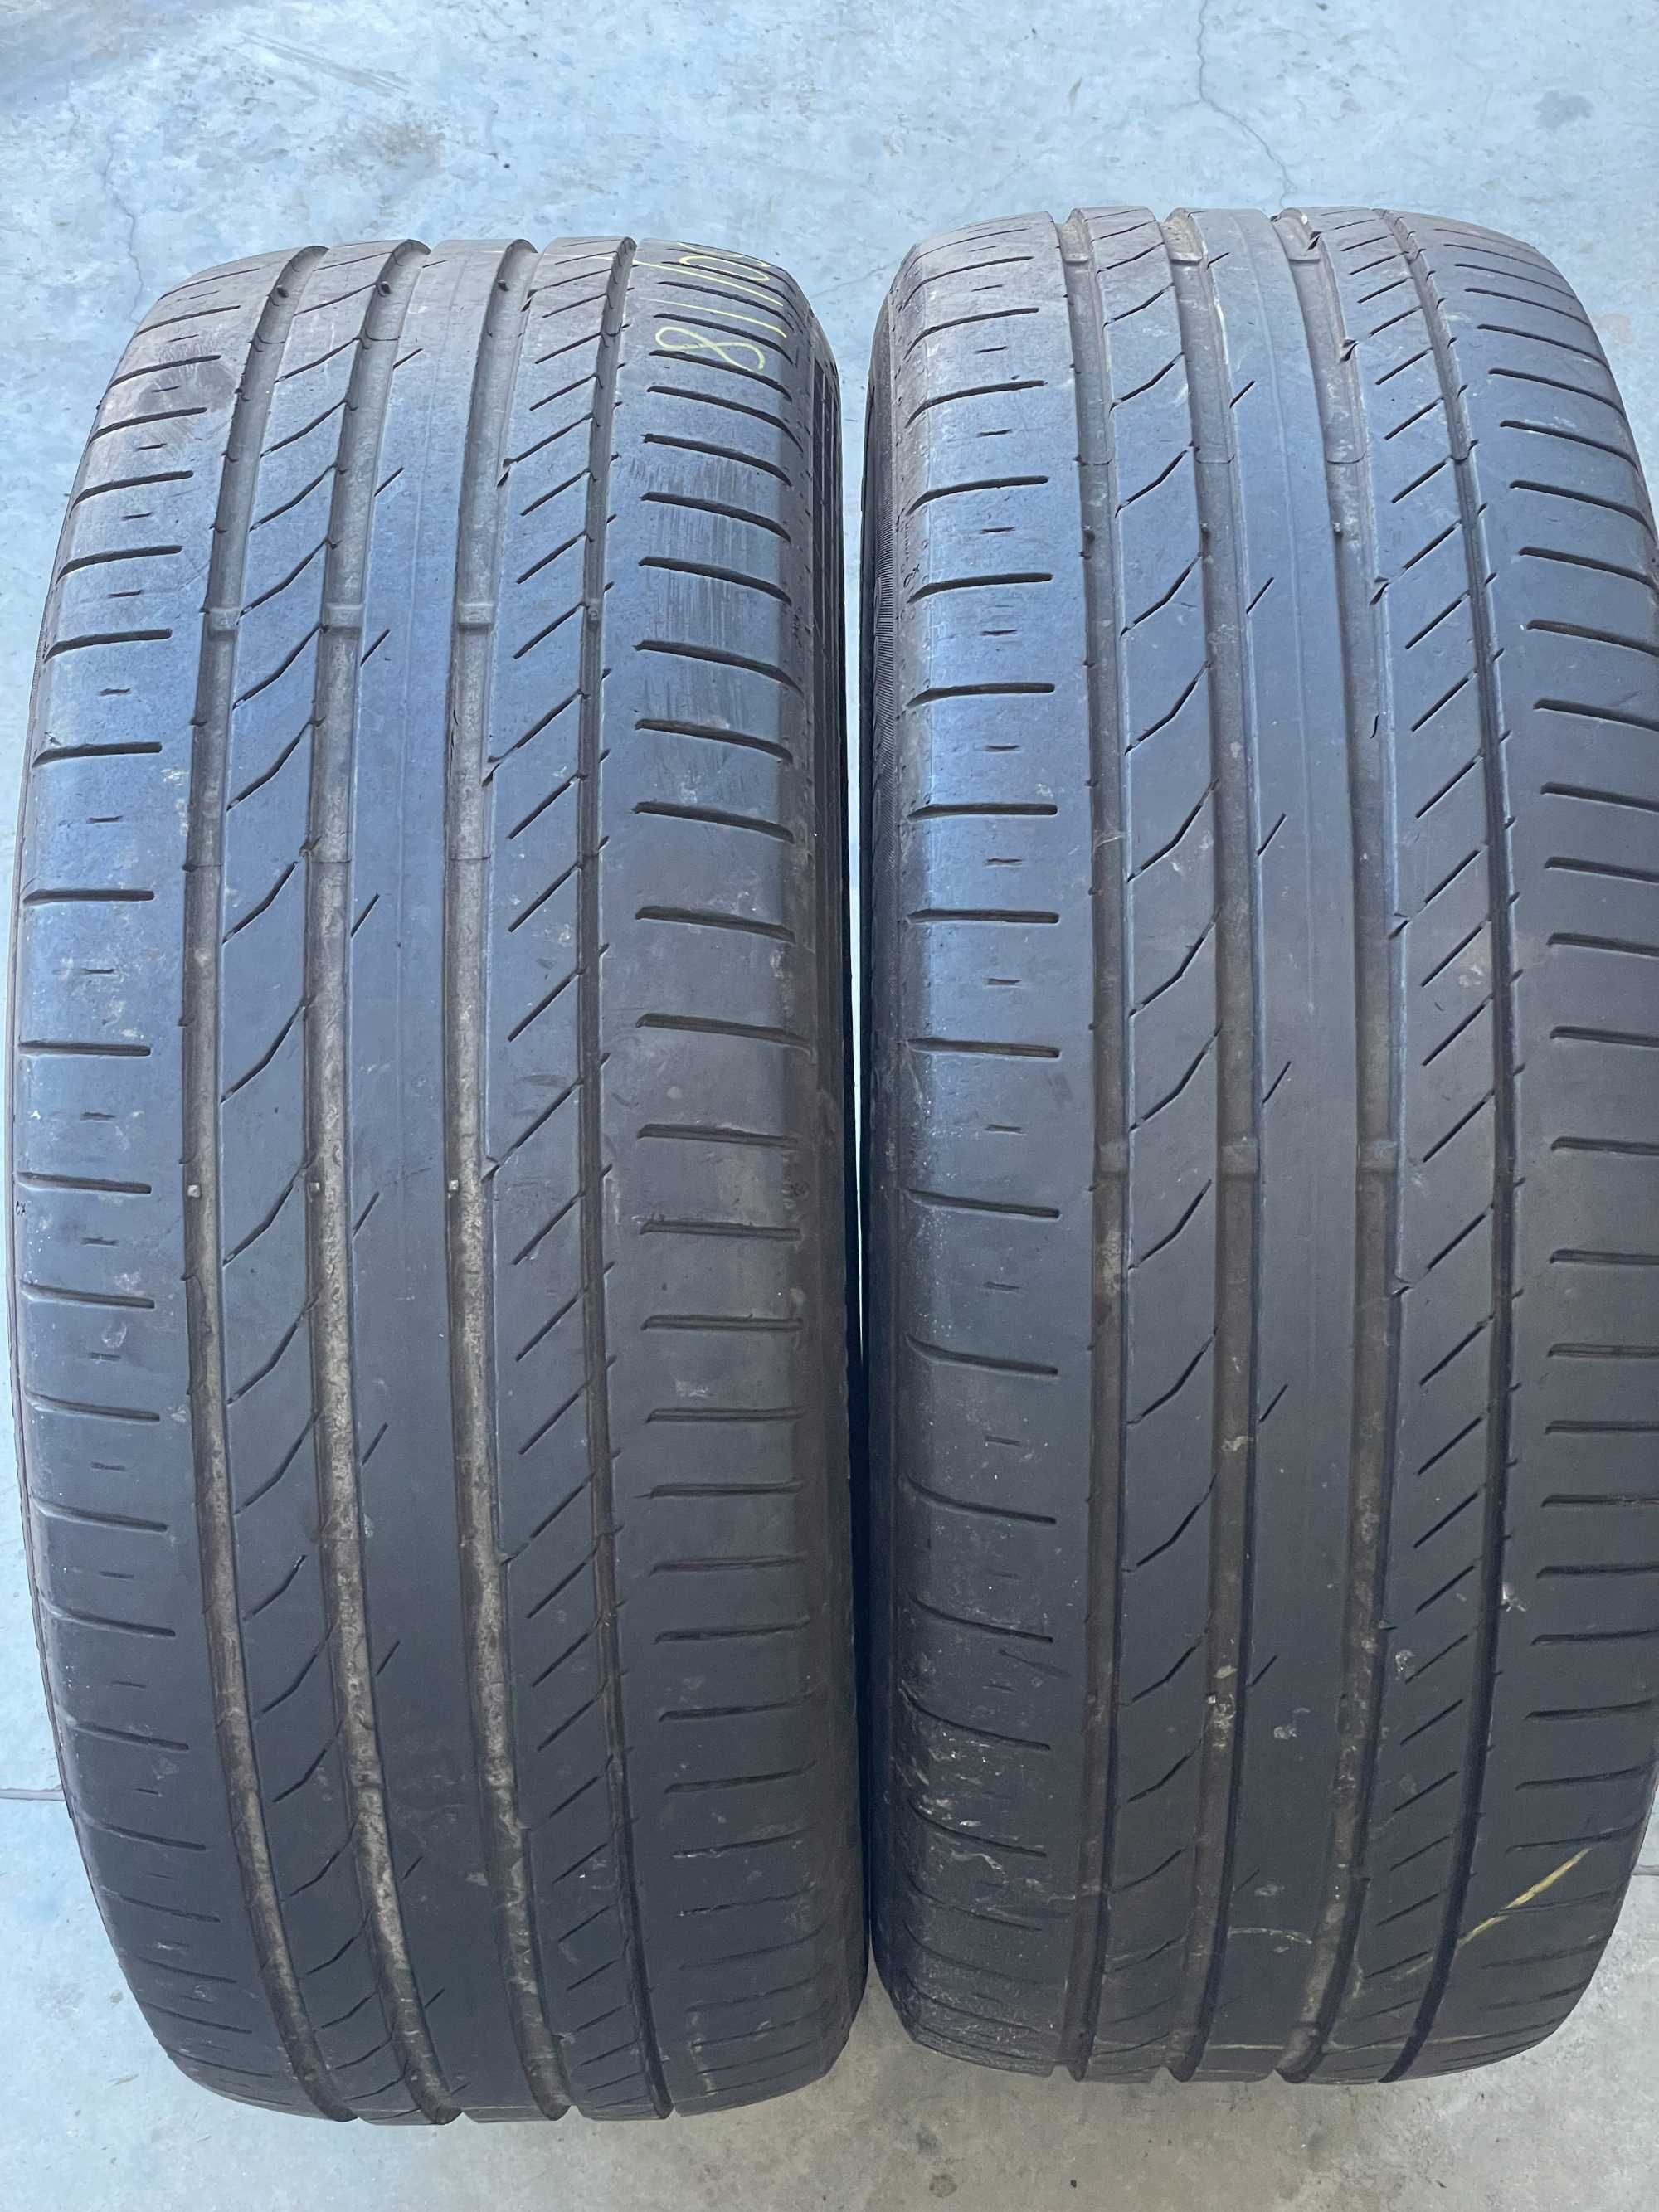 2x 235 50 18 Continental Sportcontact 5